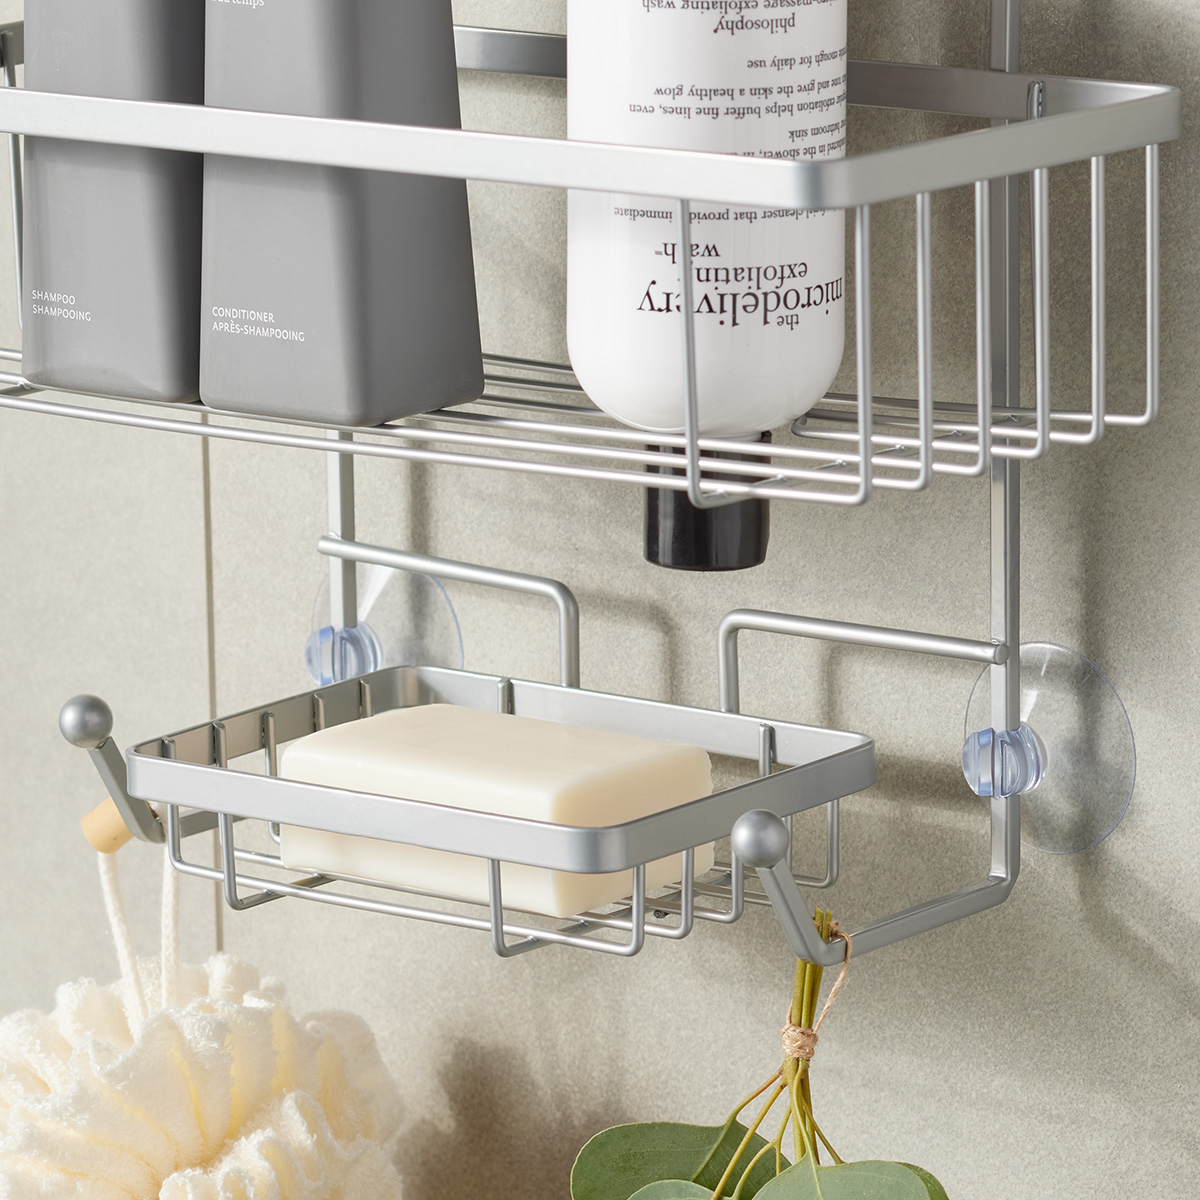 https://www.containerstore.com/catalogimages/443839/10088400_Troy_shower_caddy_silver_de.jpg